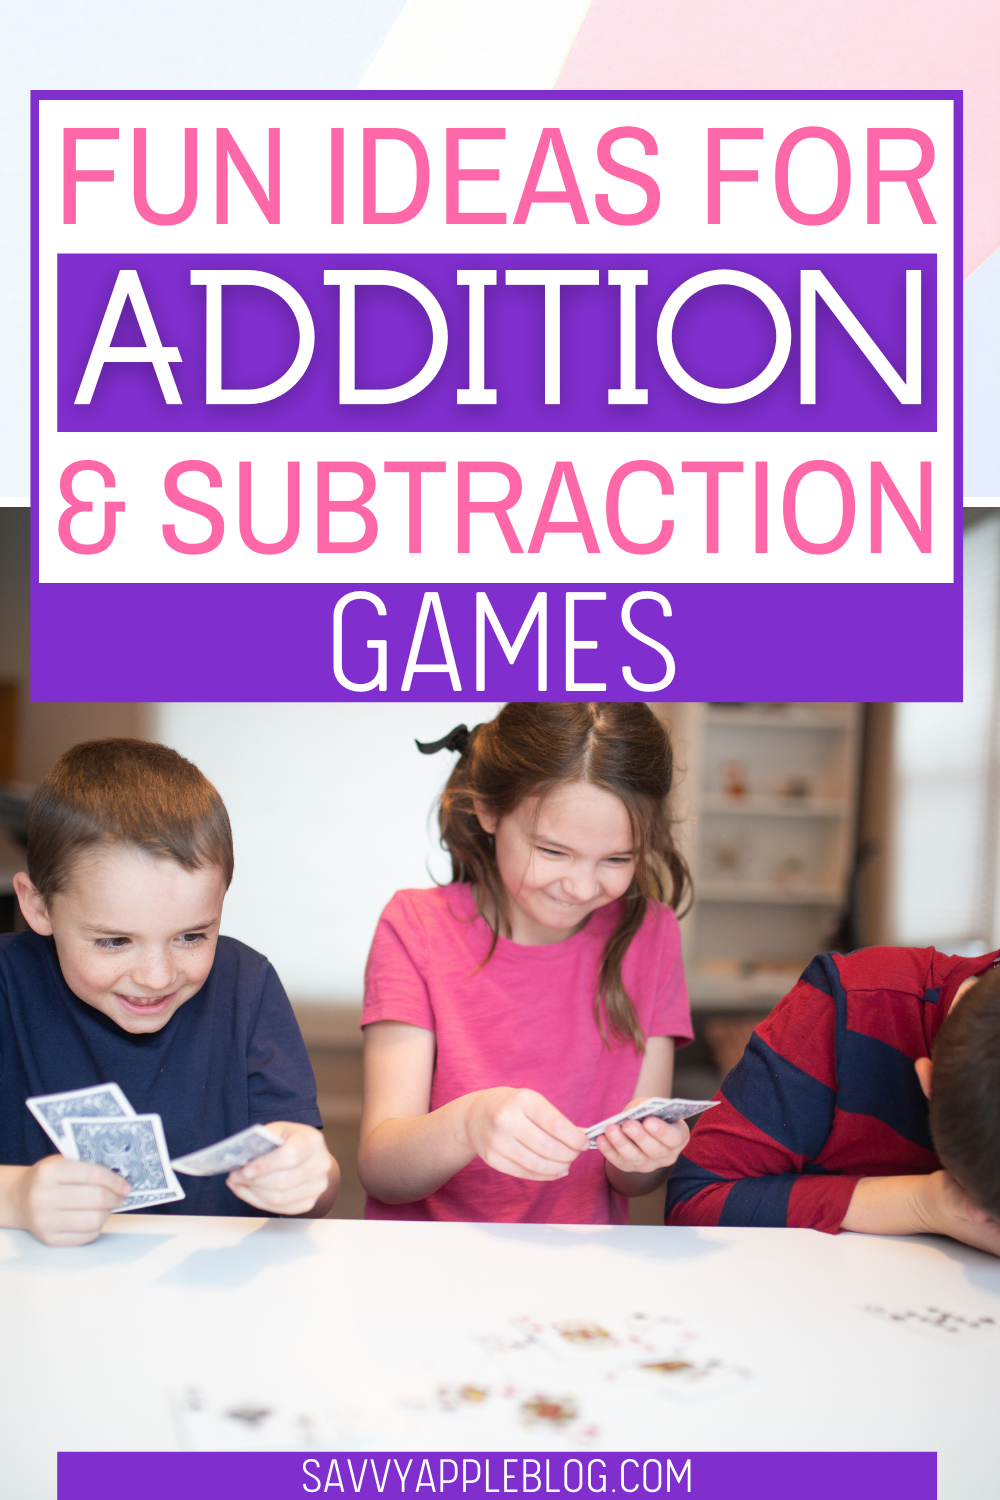 subtraction games
